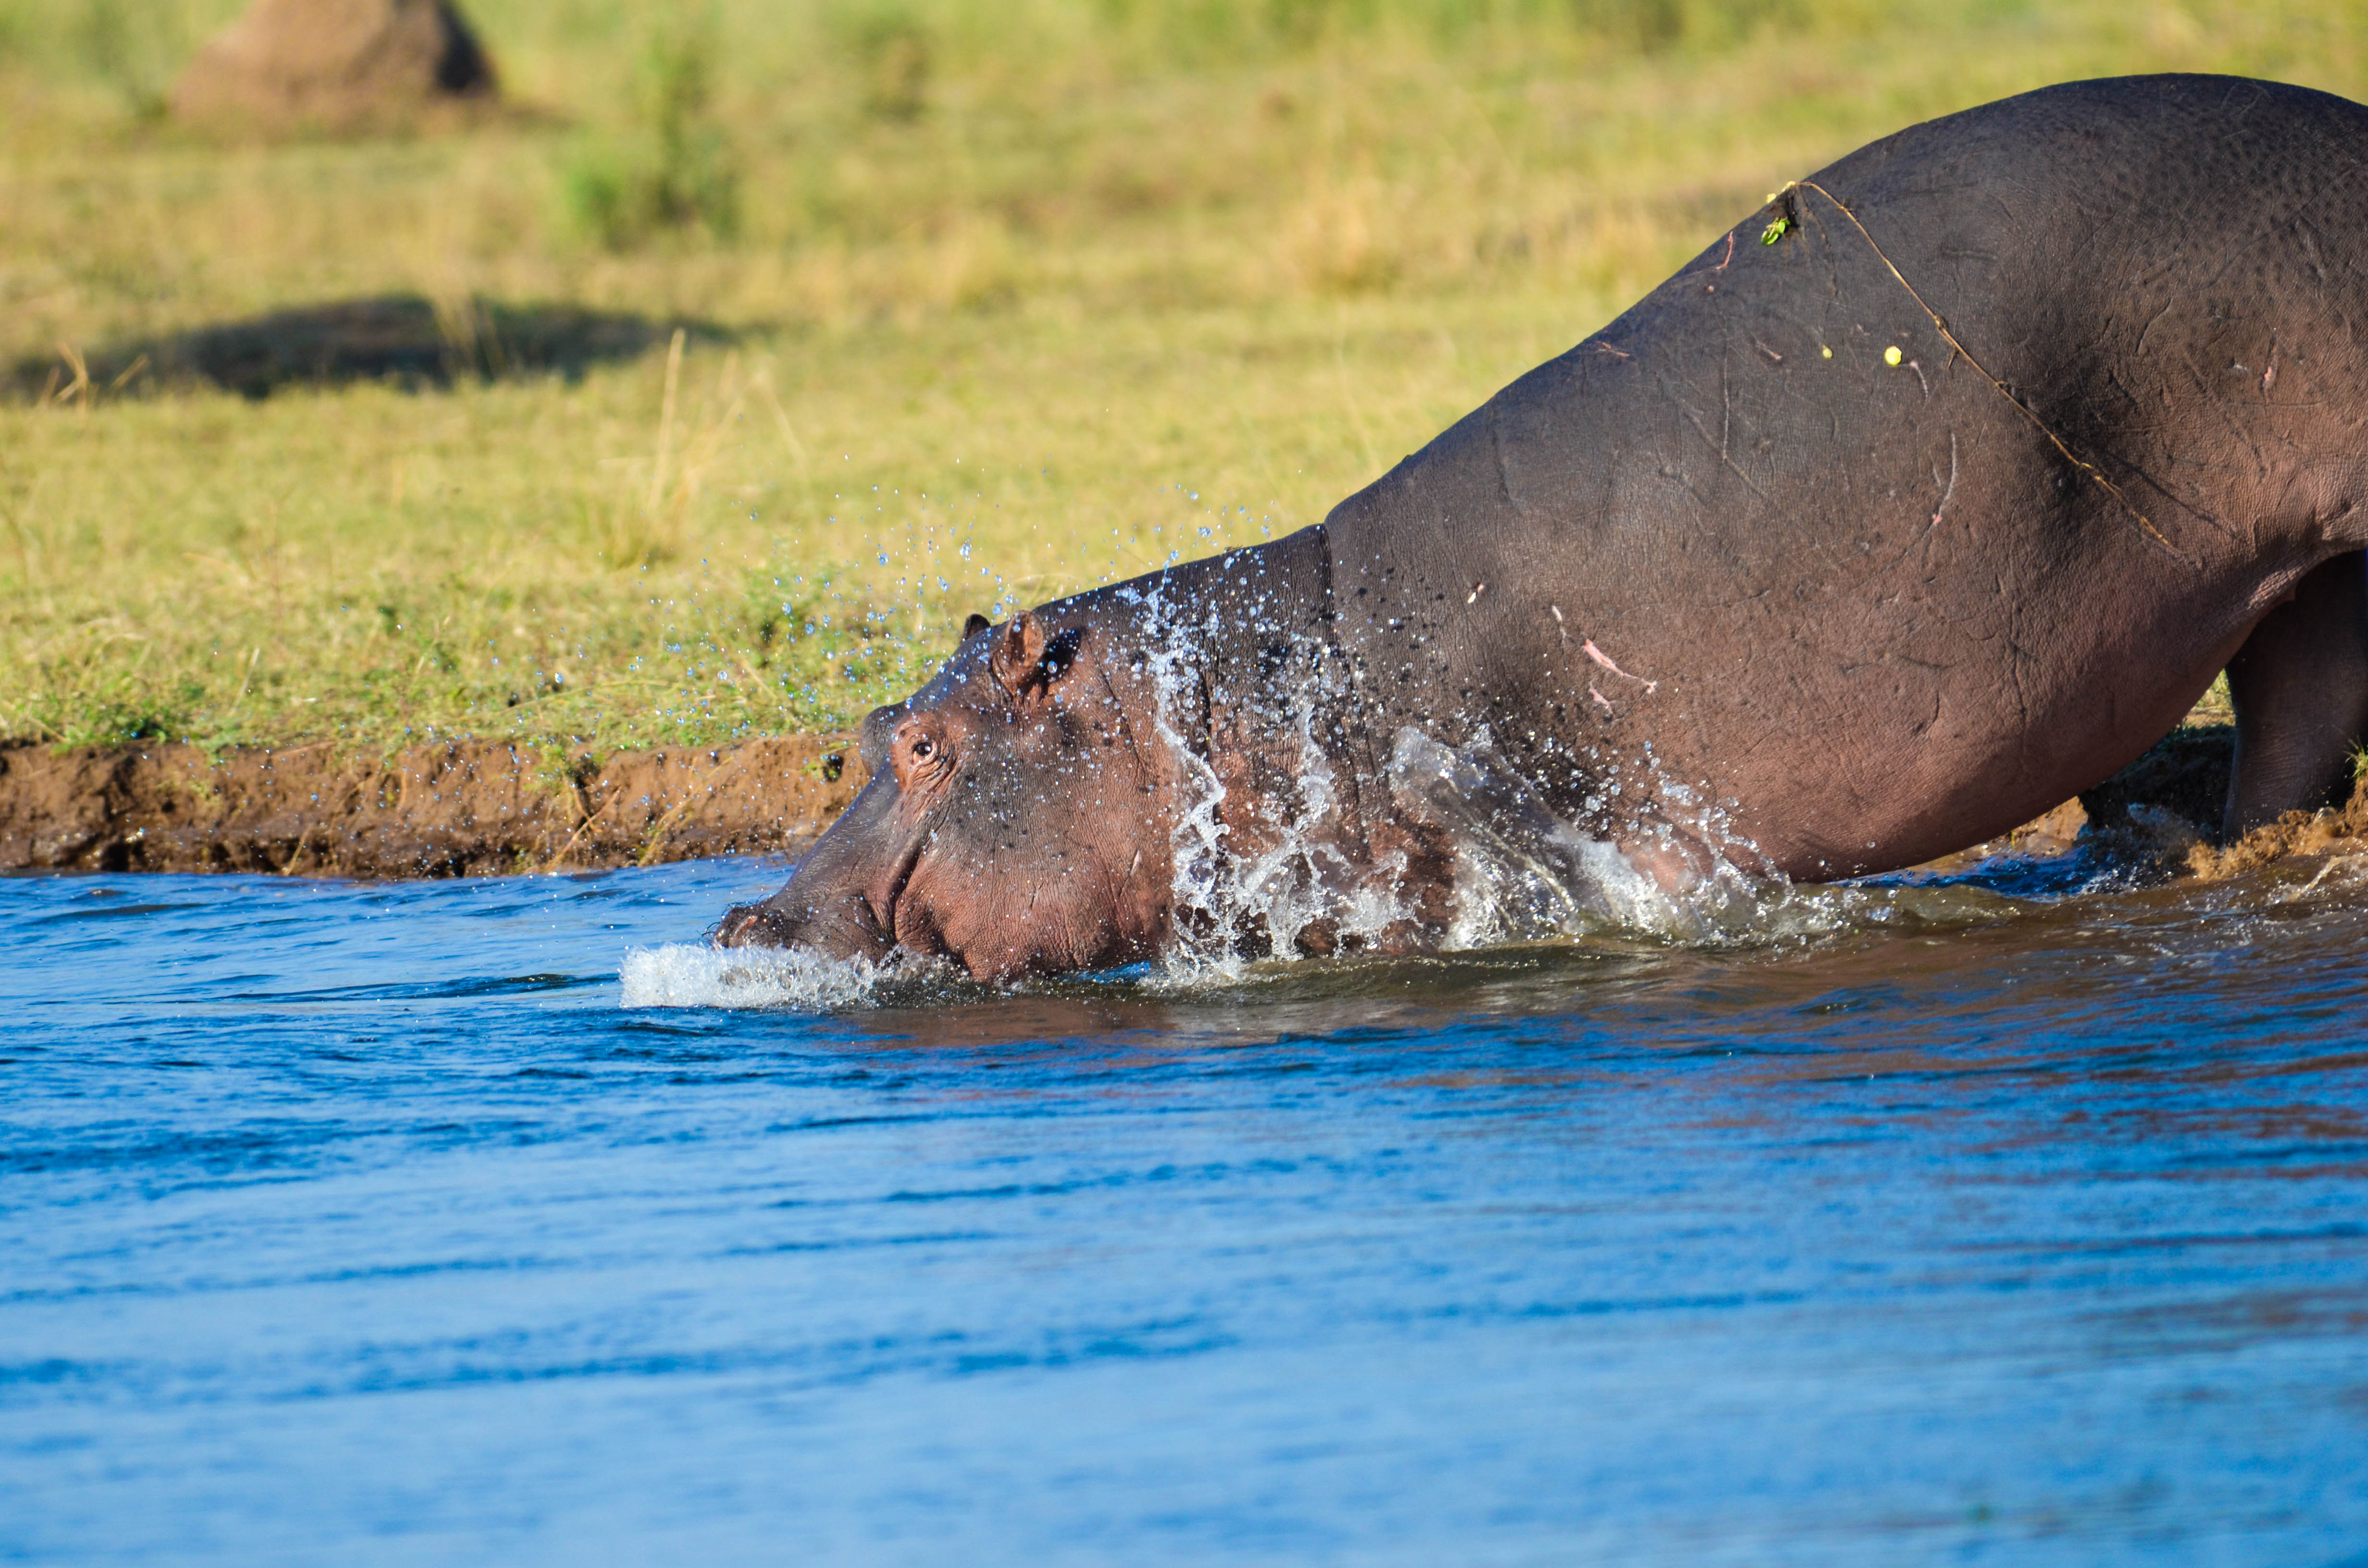 A Hippo getting back into the River